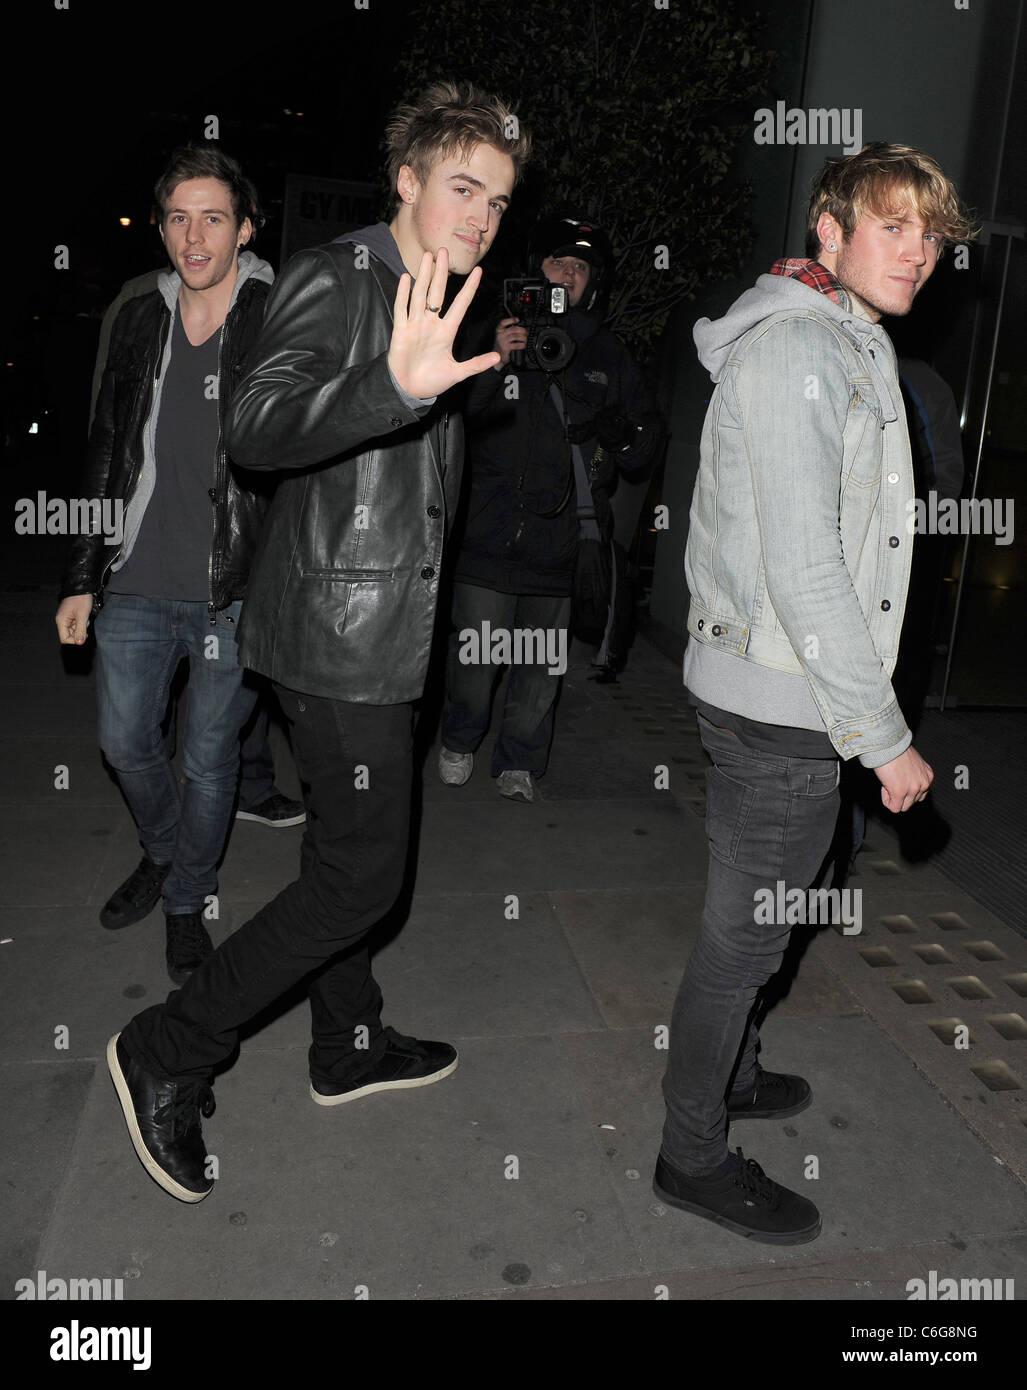 Dougie Poynter From Boy Band Mcfly Enjoys A Night Out With Fellow Stock Photo Alamy